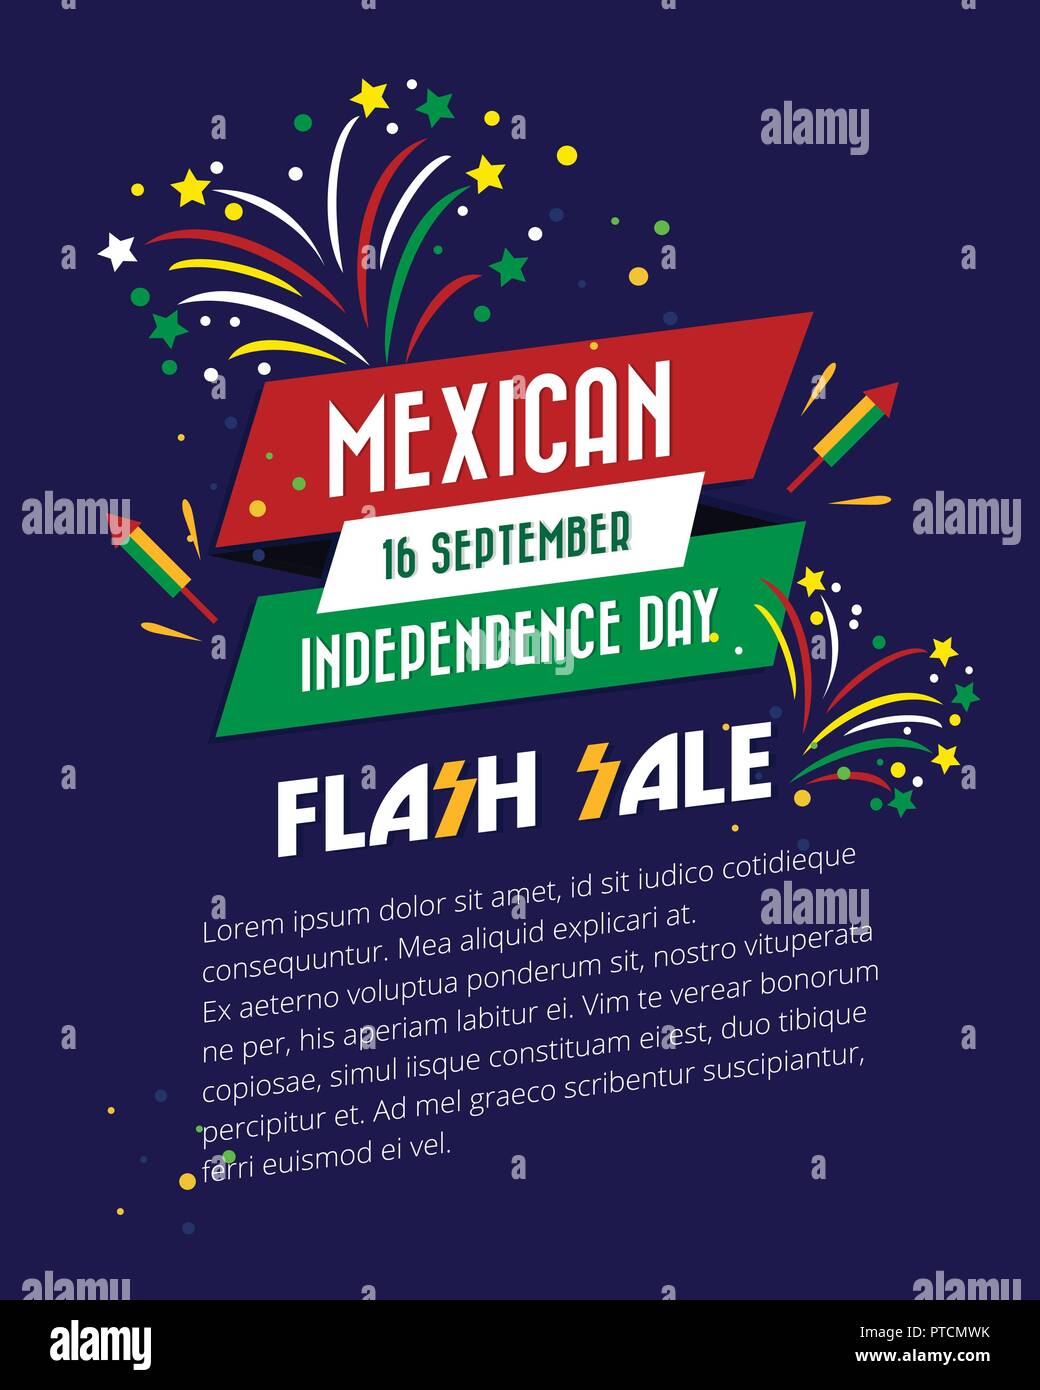 The Independence Day of Mexico poster & banner design vector illustration Stock Vector